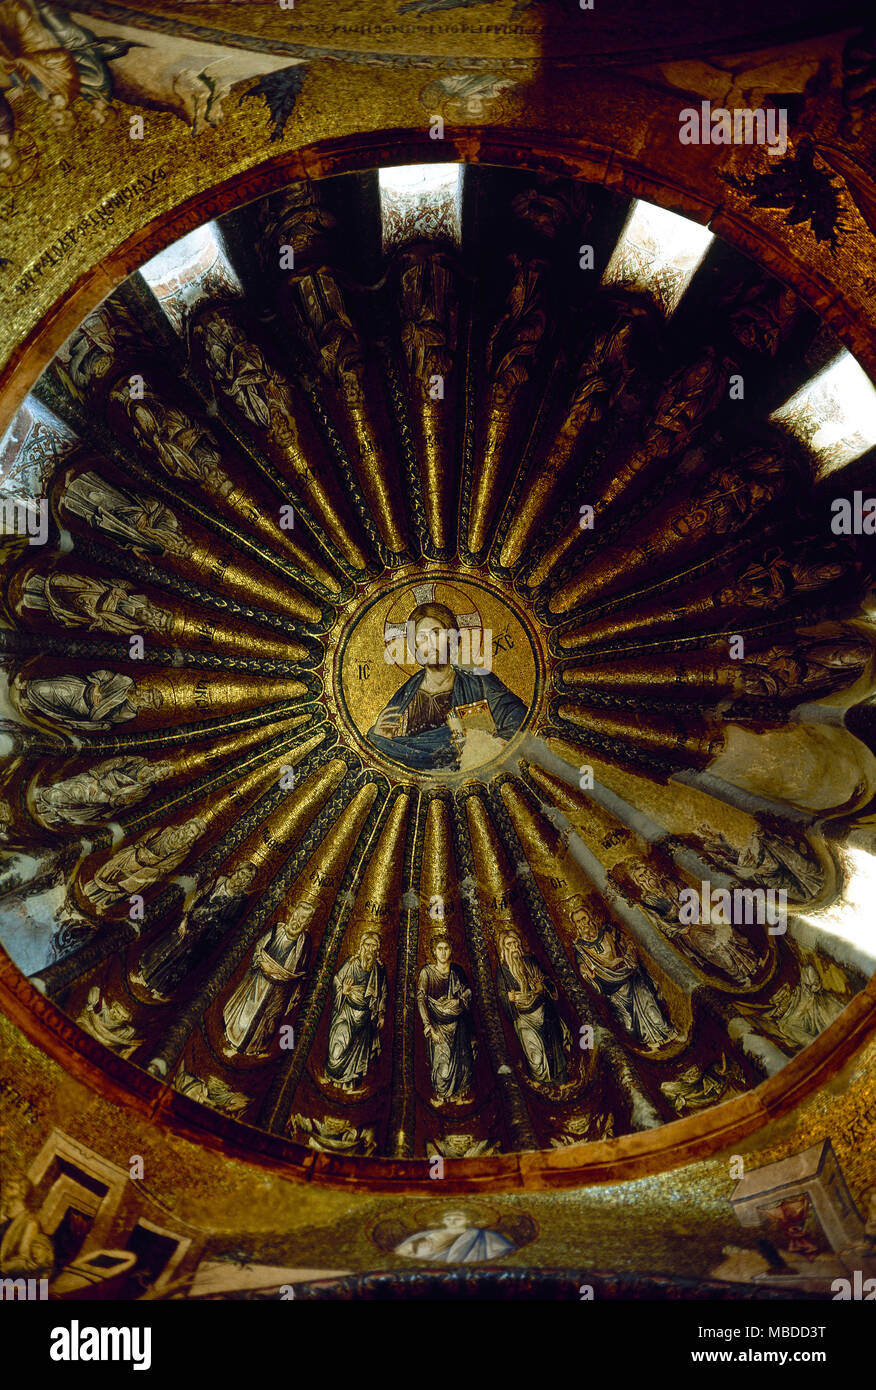 Istanbul, Turkey. Church of the Holy Saviour in Chora. Mosaic depicting Christ Panthocrator and the genealogy of Christ from Adam to Jacob and his twelve sons. South dome of the inner narthex. 14th century. Stock Photo